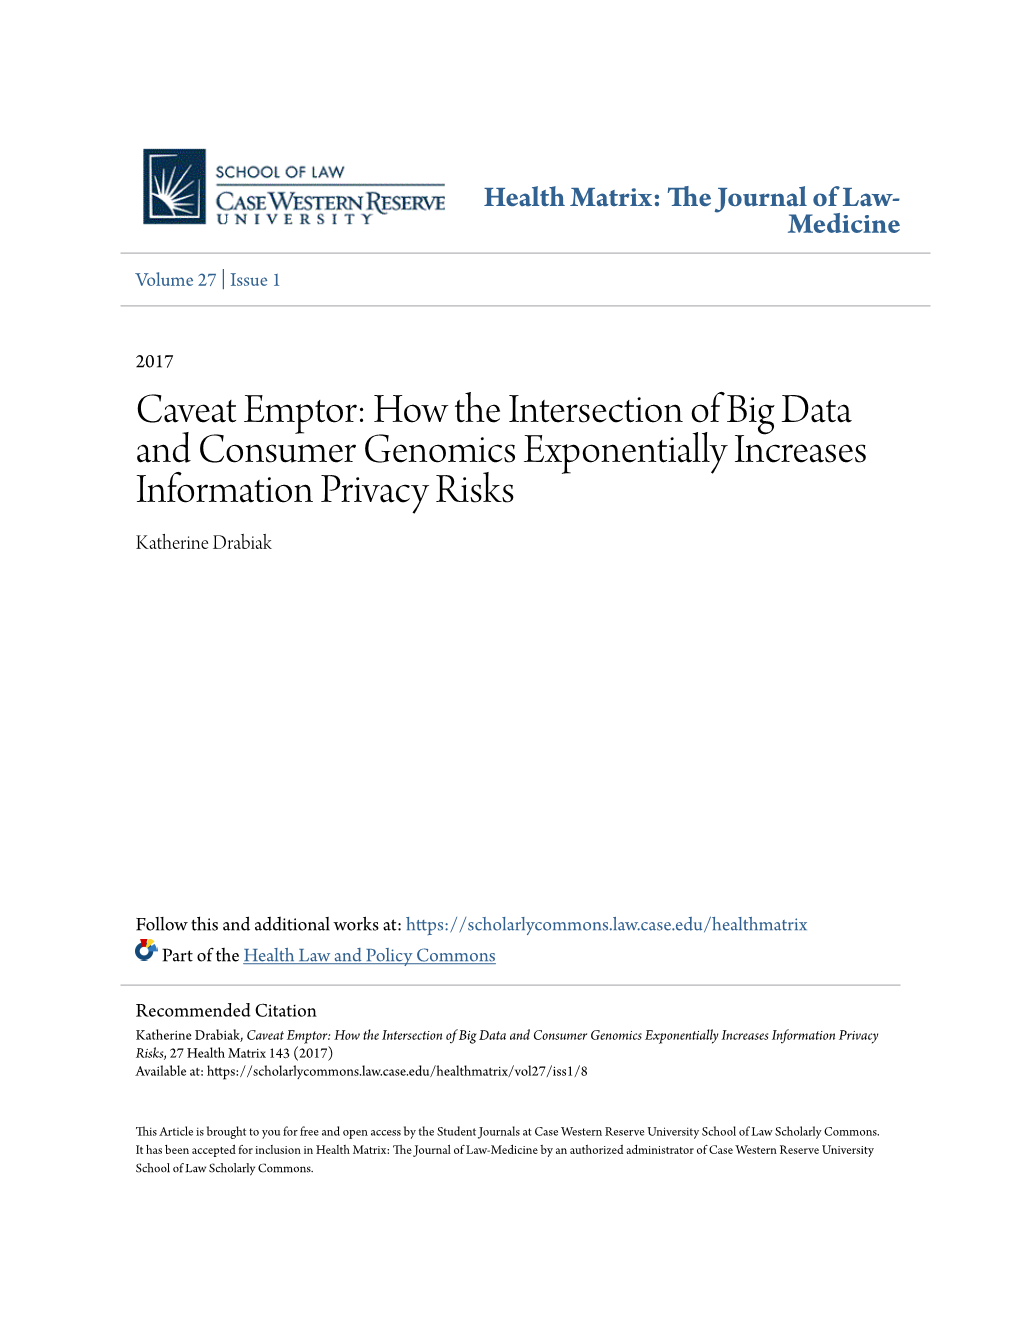 Caveat Emptor: How the Intersection of Big Data and Consumer Genomics Exponentially Increases Information Privacy Risks Katherine Drabiak